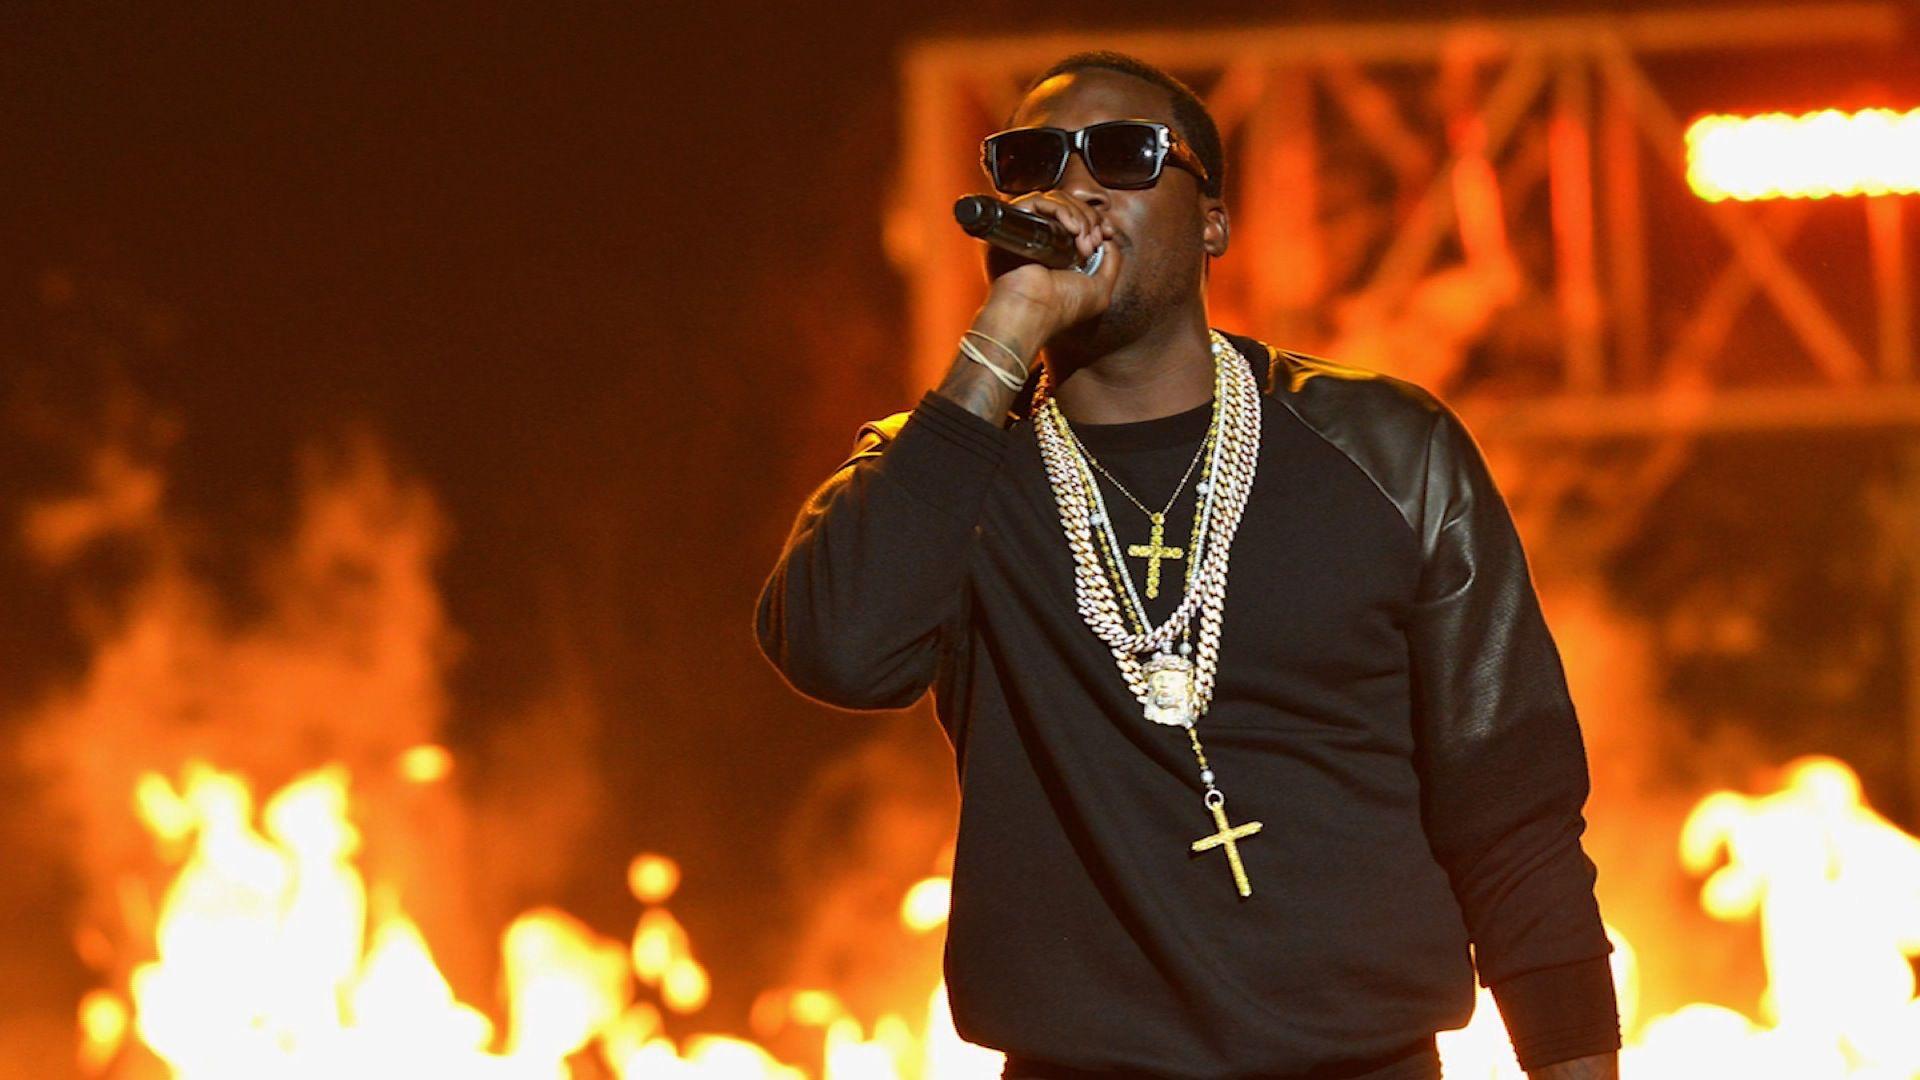 Lawyers: Judge wanted favors from Meek Mill